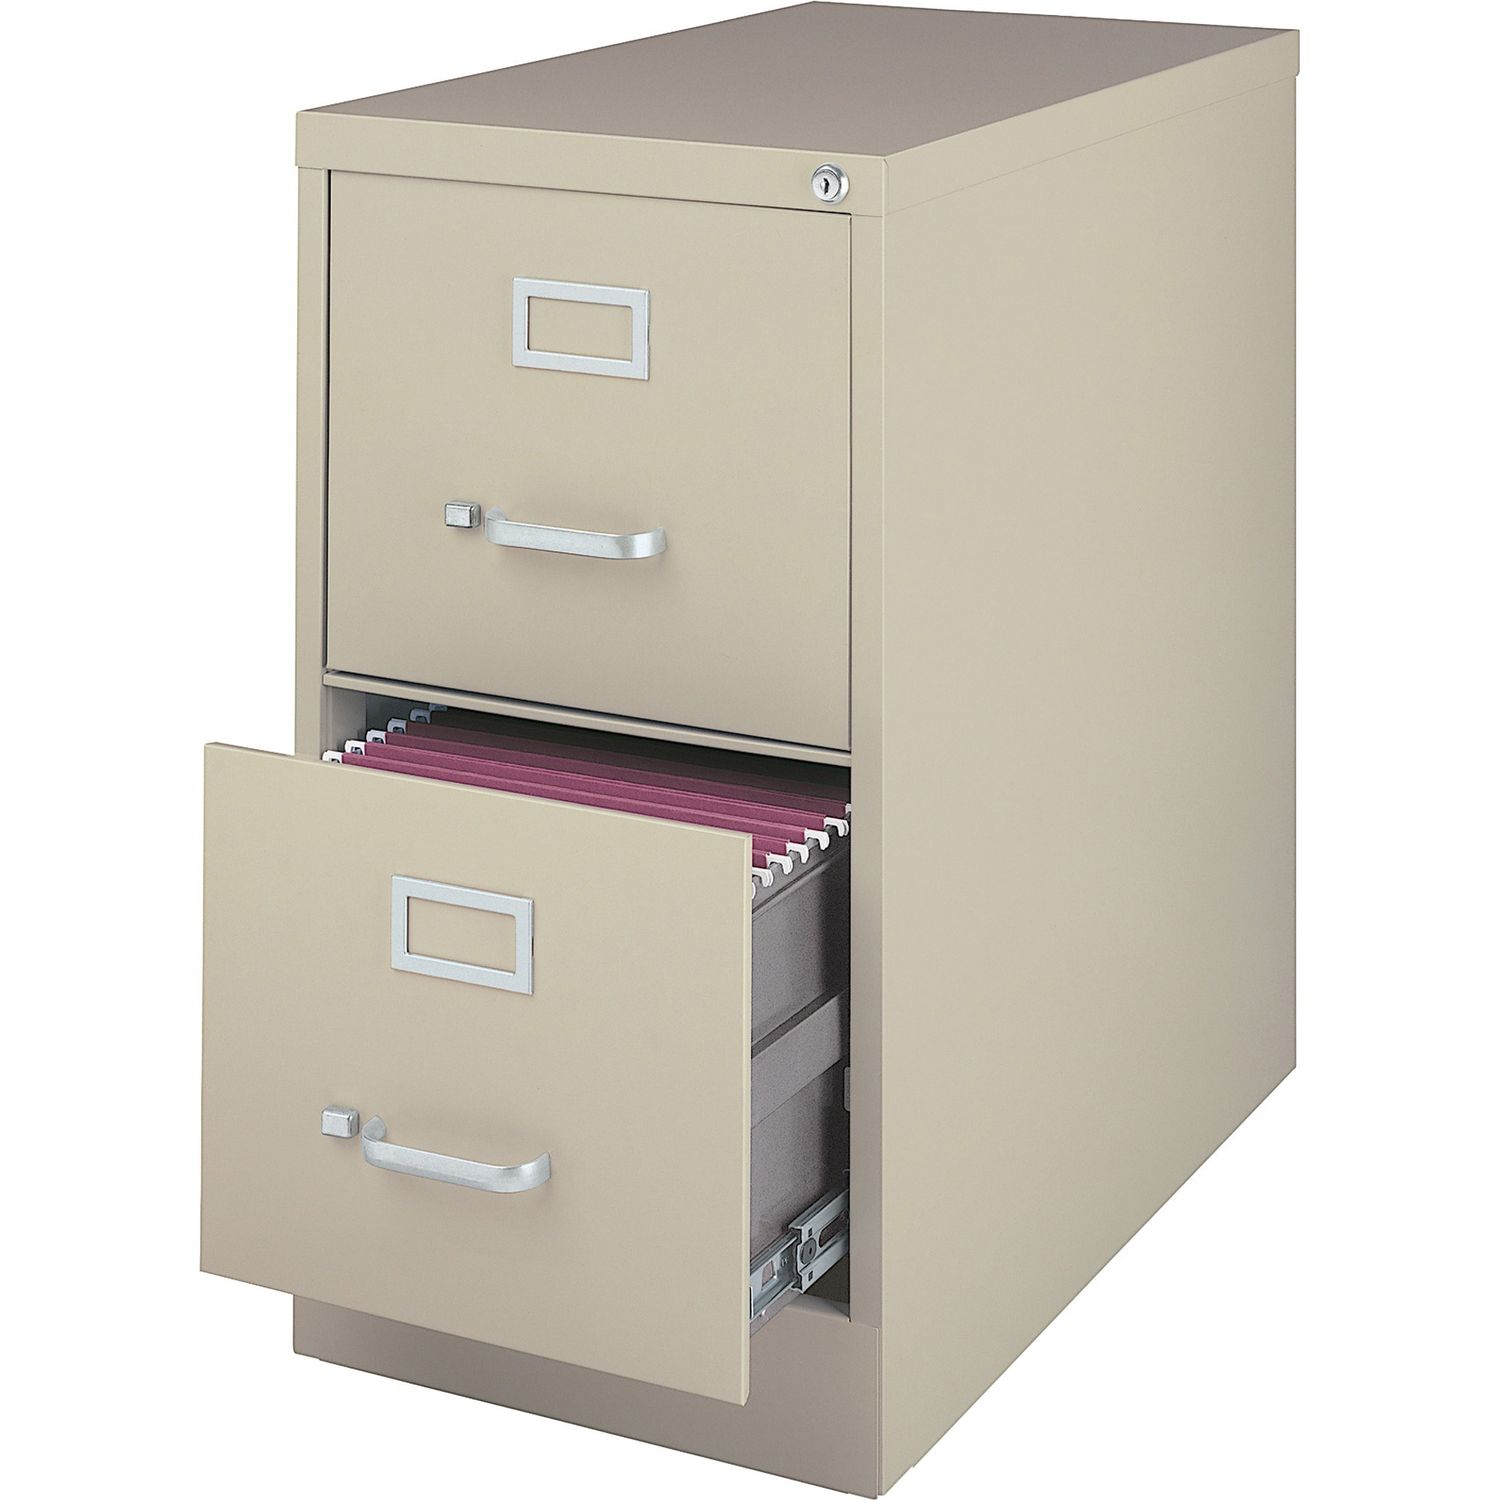 Fortress Series 28.5'' Letter-size Vertical Files - 2-Drawer 15" x 28" x 28.5", 2 x Drawer(s) for File, Letter, Vertical, Ball Bearing Glide, Label Holder, Locking Drawer, Heavy Duty, Putty